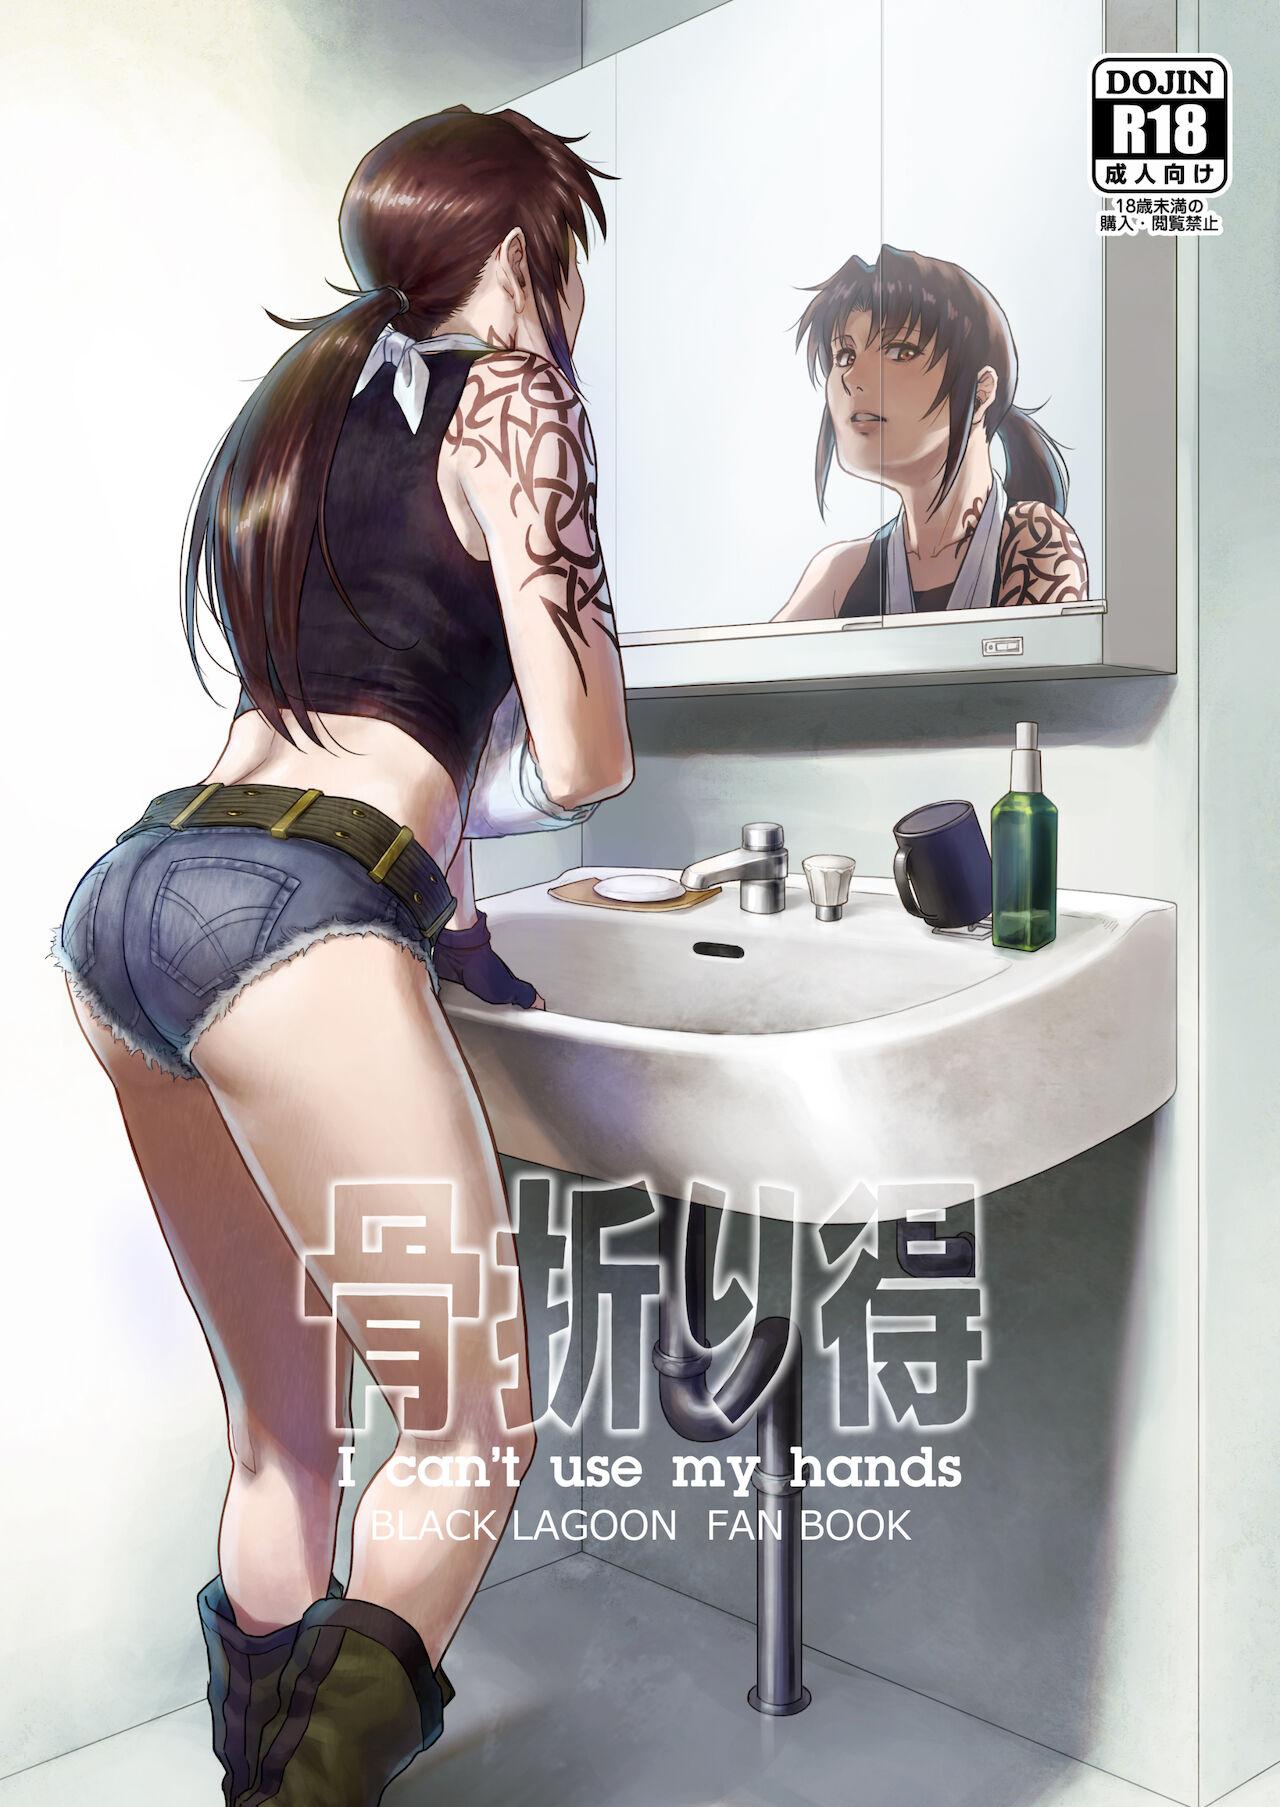 Best Blow Job Ever Honeoridoku - I can't use my hands - Black lagoon White Chick - Page 1